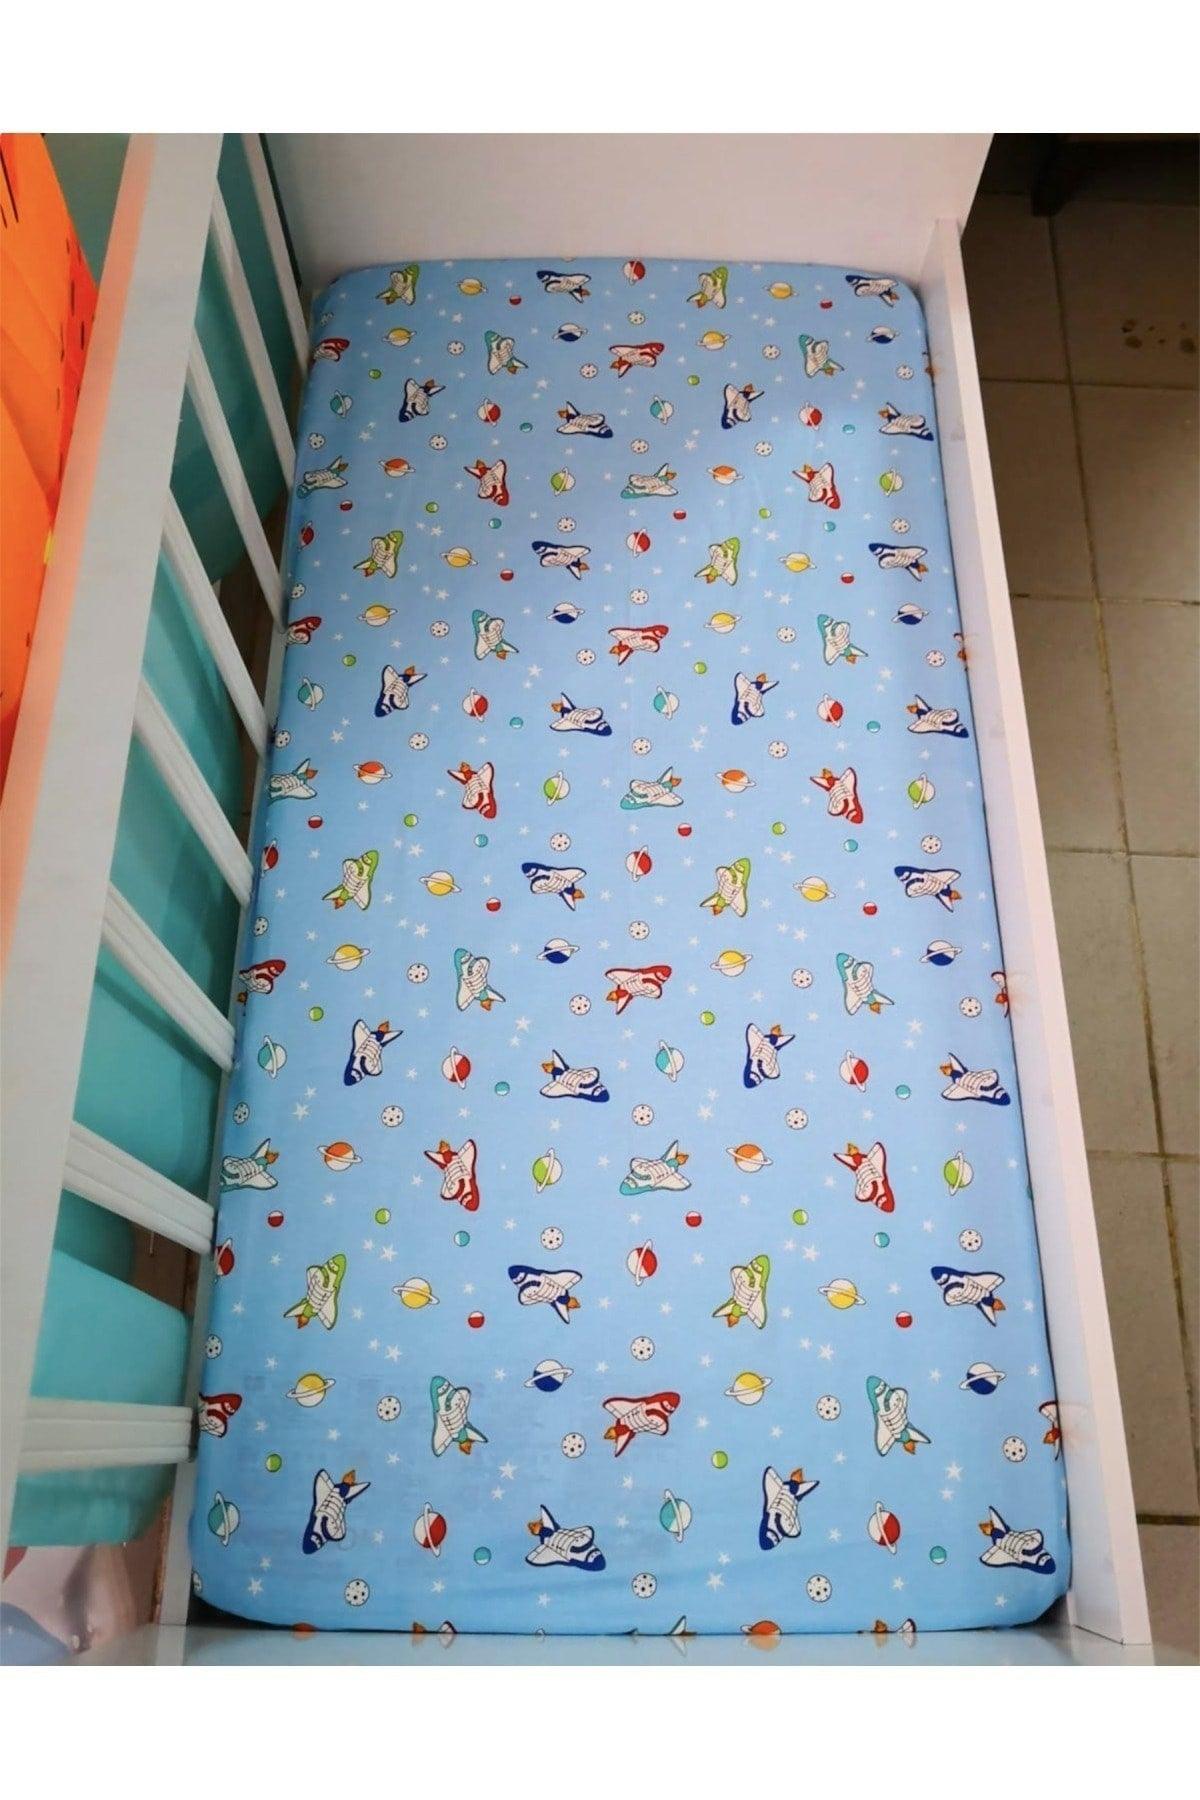 100% Cotton Kids Elastic Bed Sheet 120x200 (2 Pieces) Blue Galaxy And Rainbow - Swordslife